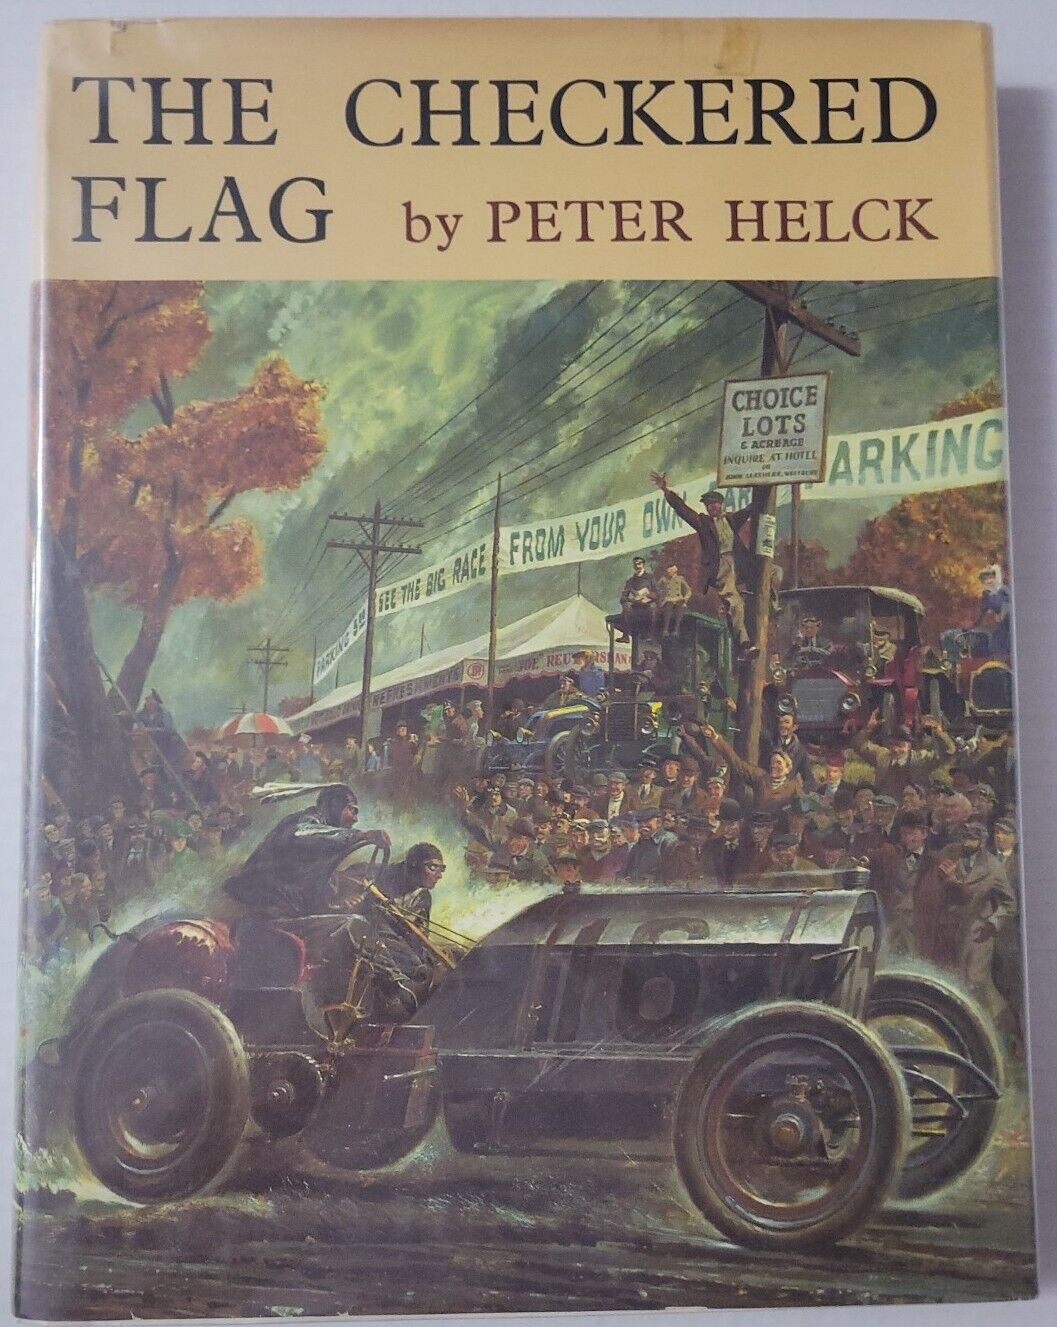 The Checkered Flag by Peter Helck 1961 Hardcover DJ Racing Cars Art Book VTG 